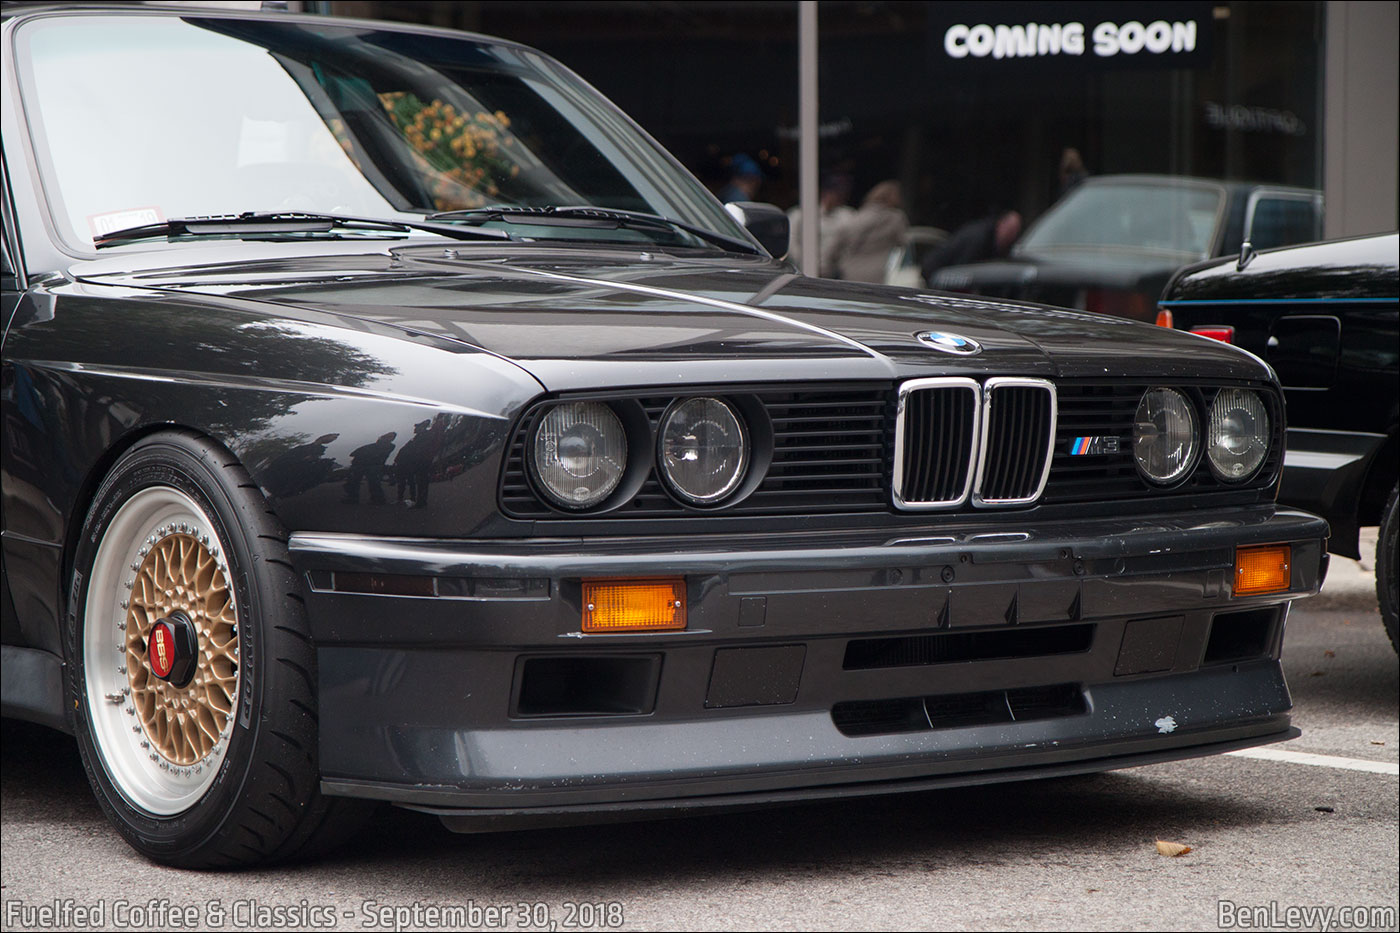 Front grill of E30 BMW M3